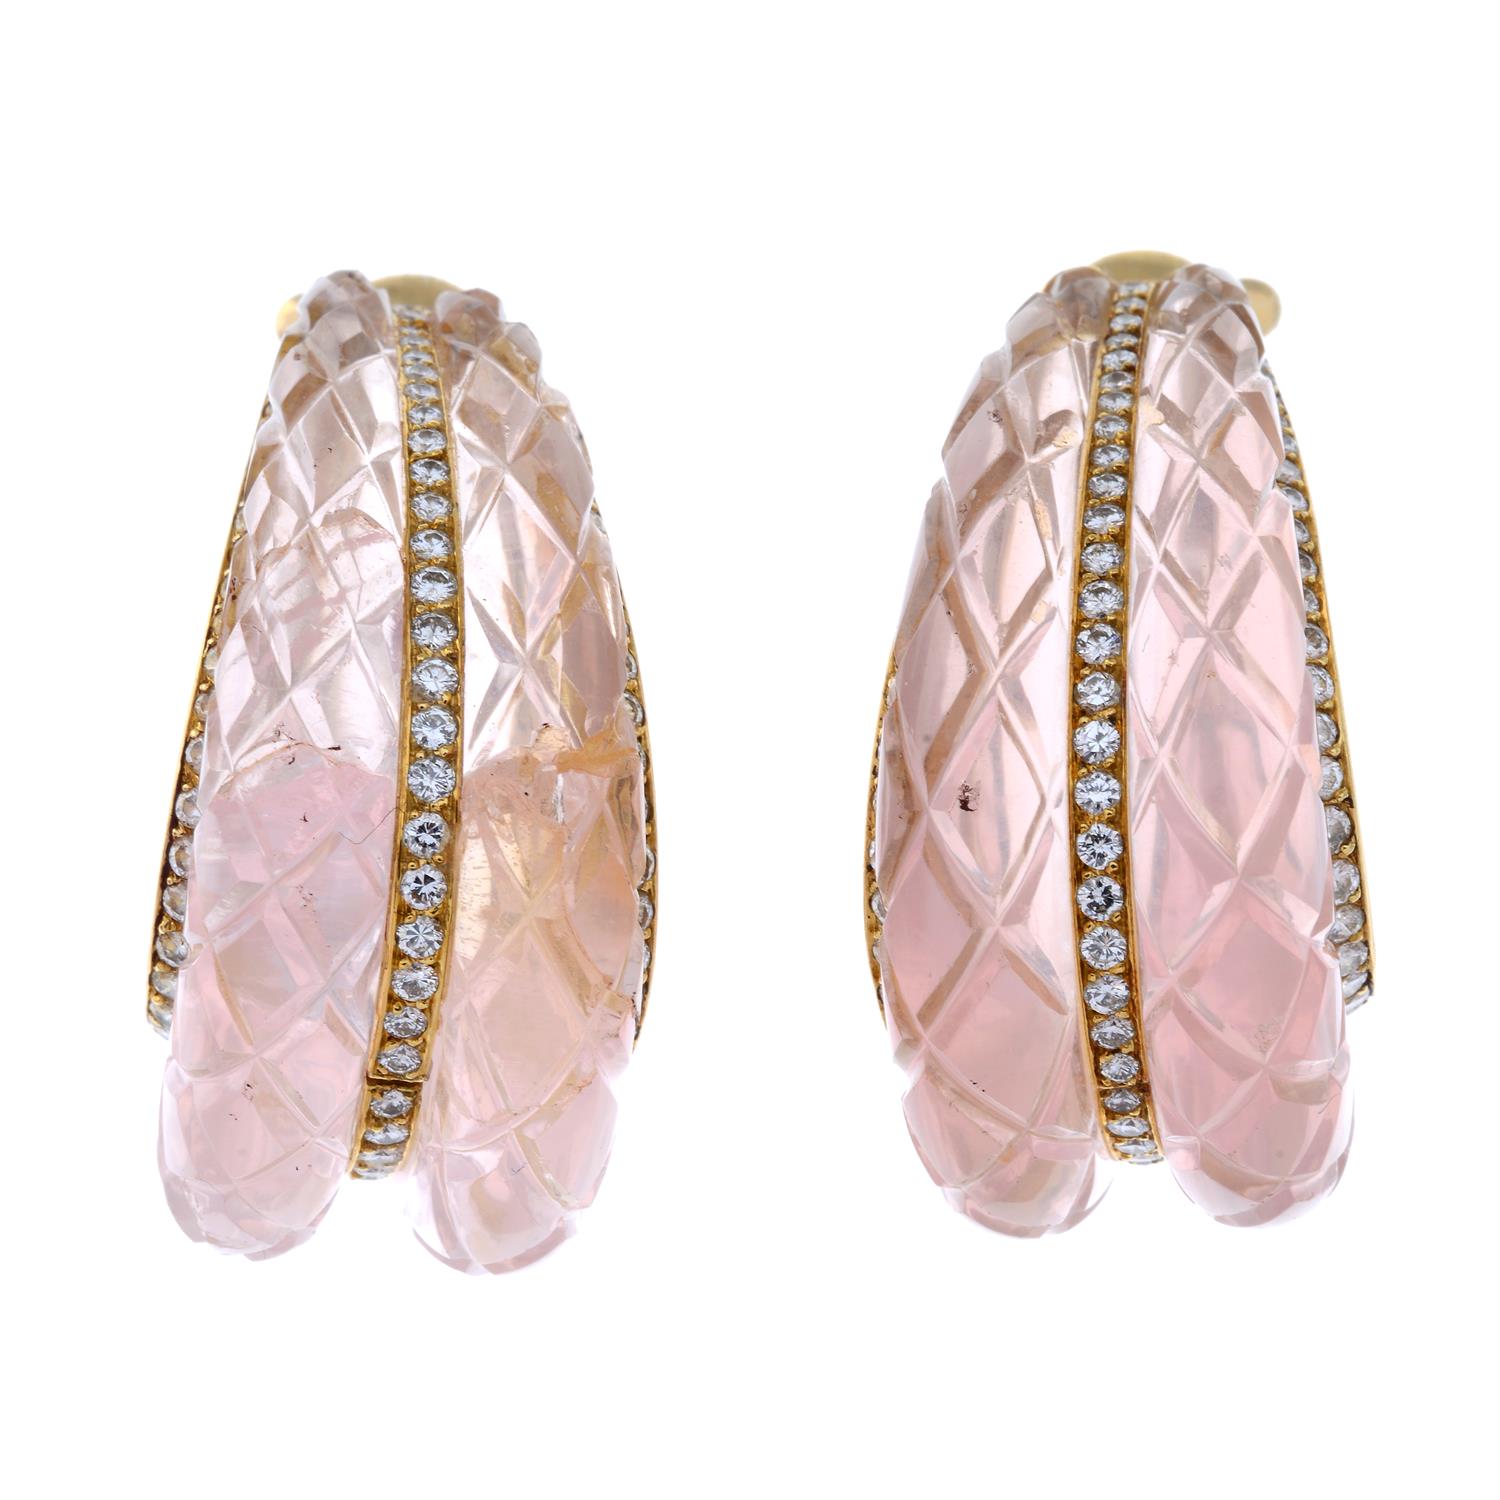 Rose quartz and diamond earrings, by Cartier - Image 2 of 3